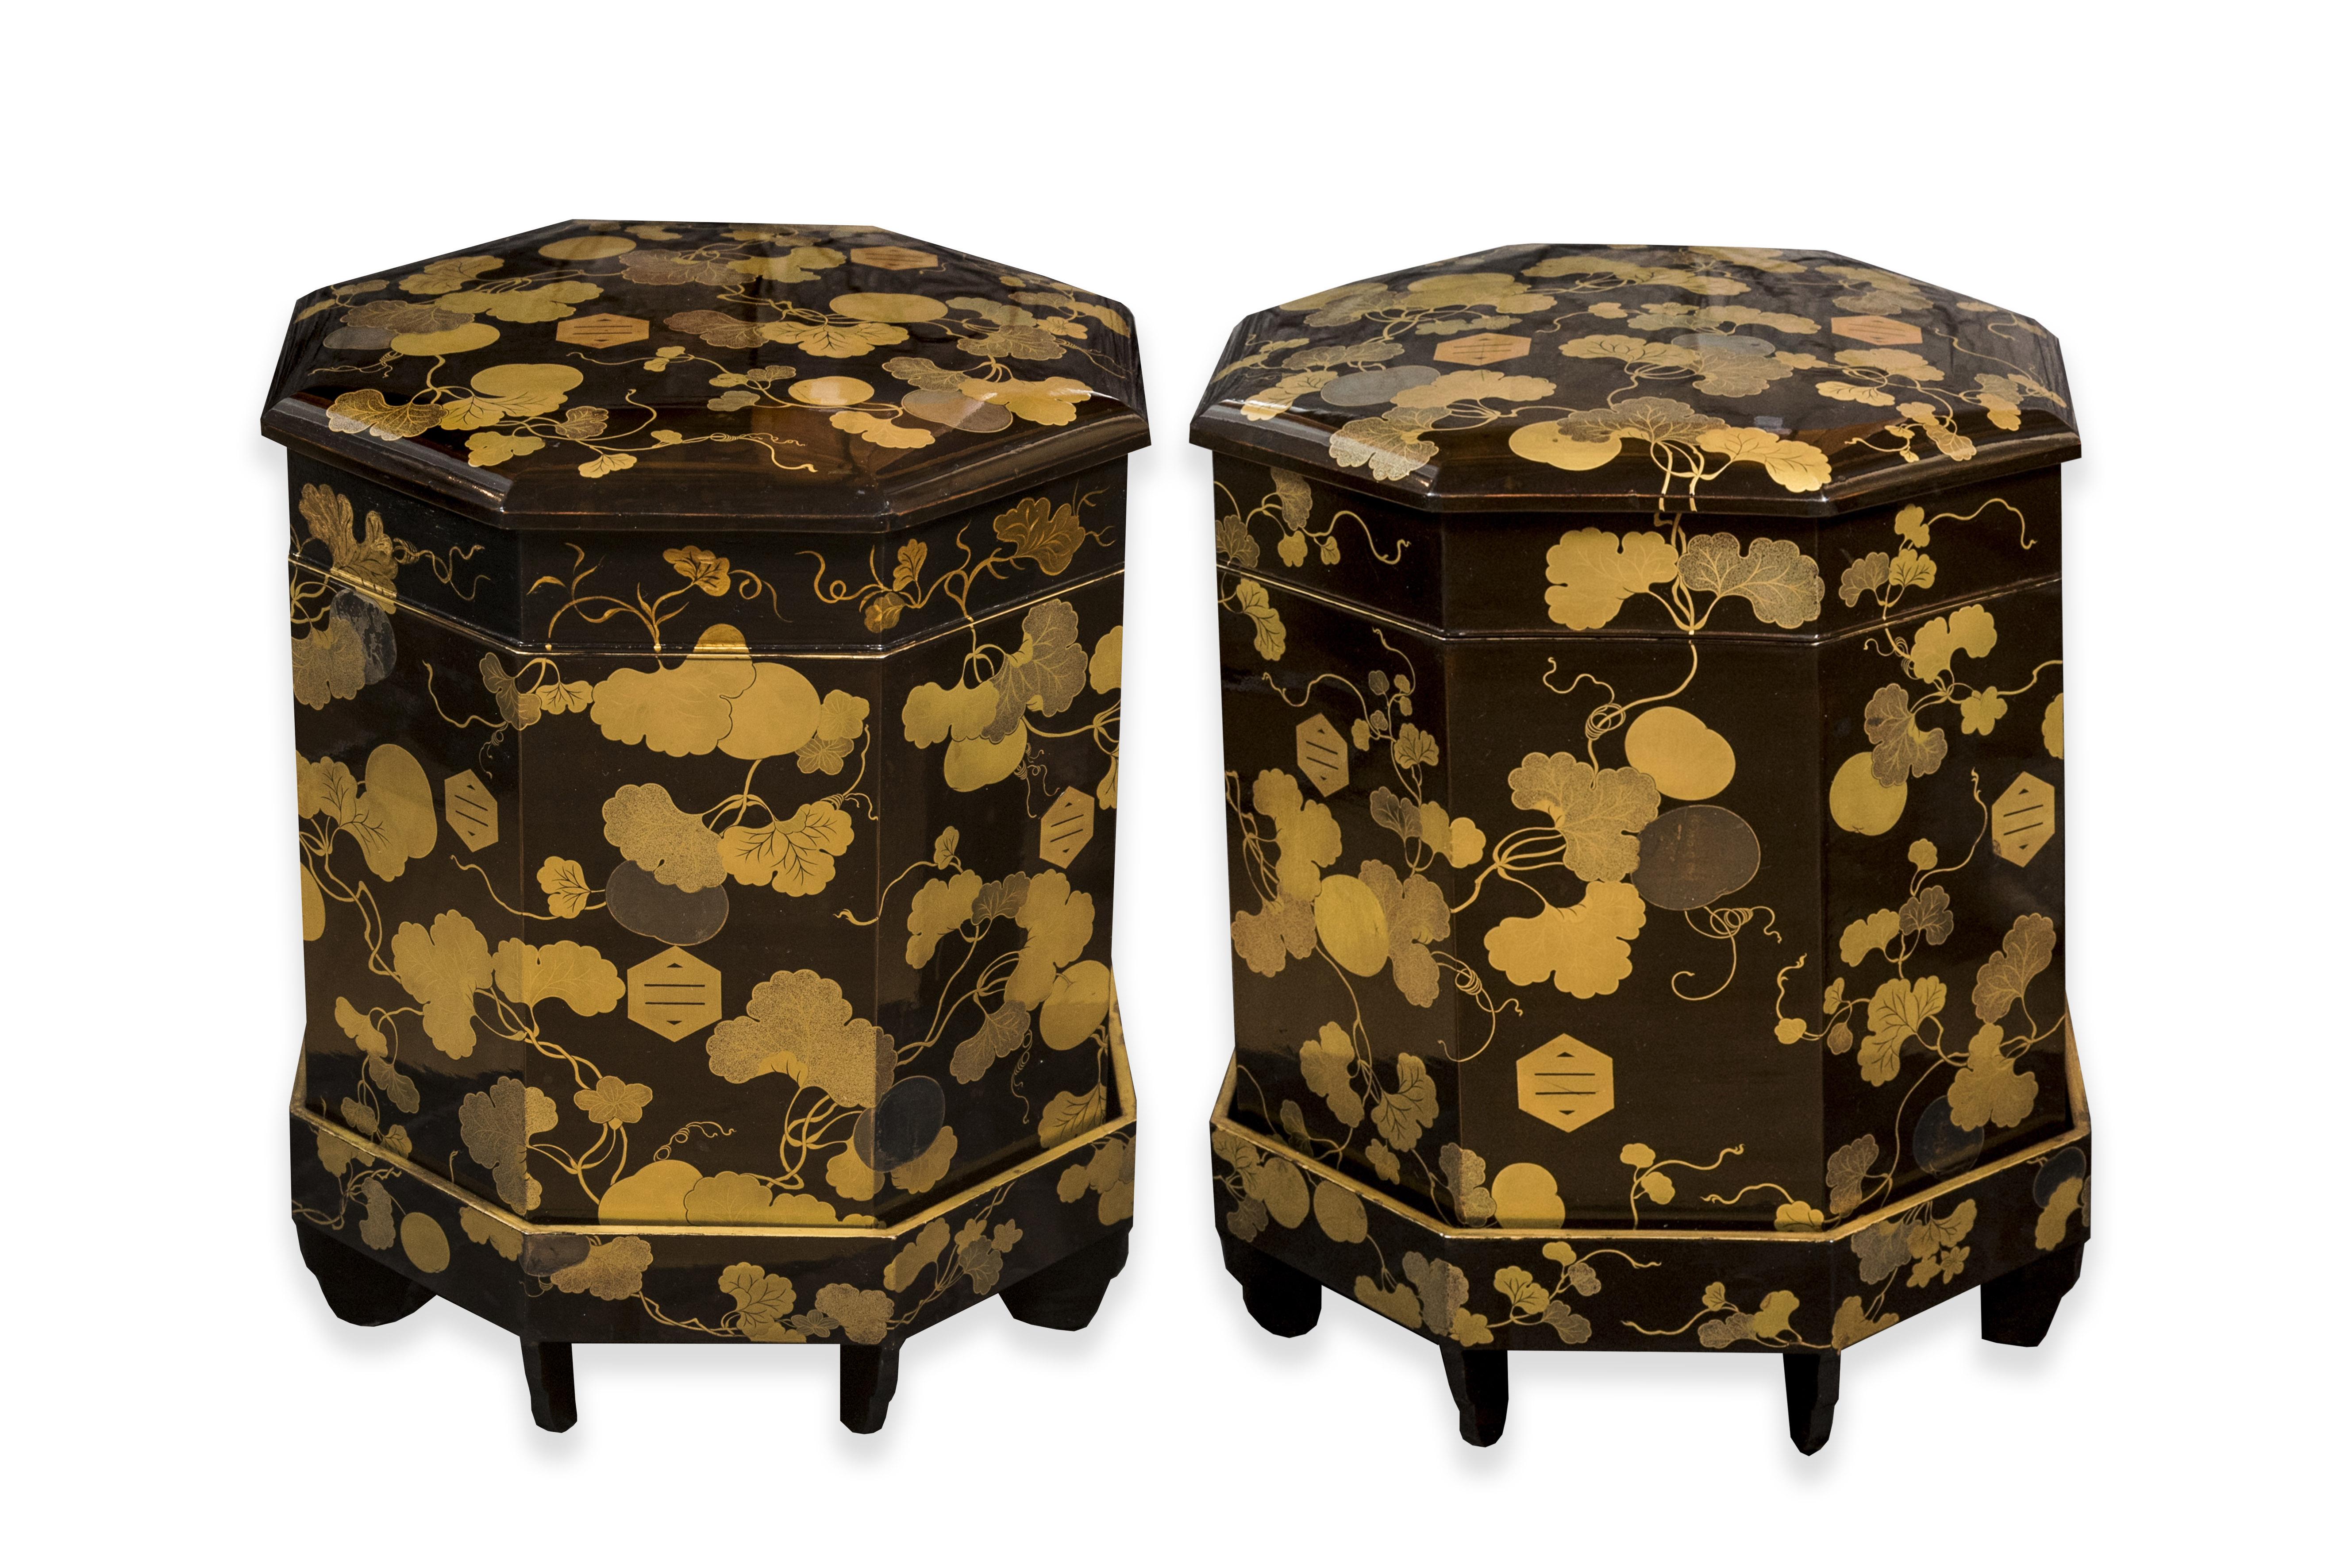 Two big eight-sided kaioke boxes in black lacquer, decorated with mon and maple leaves in golden lacquer. 

These are usually octagonal boxes containing the painted shells used in the game of kai awase (shell association). These boxes contain two